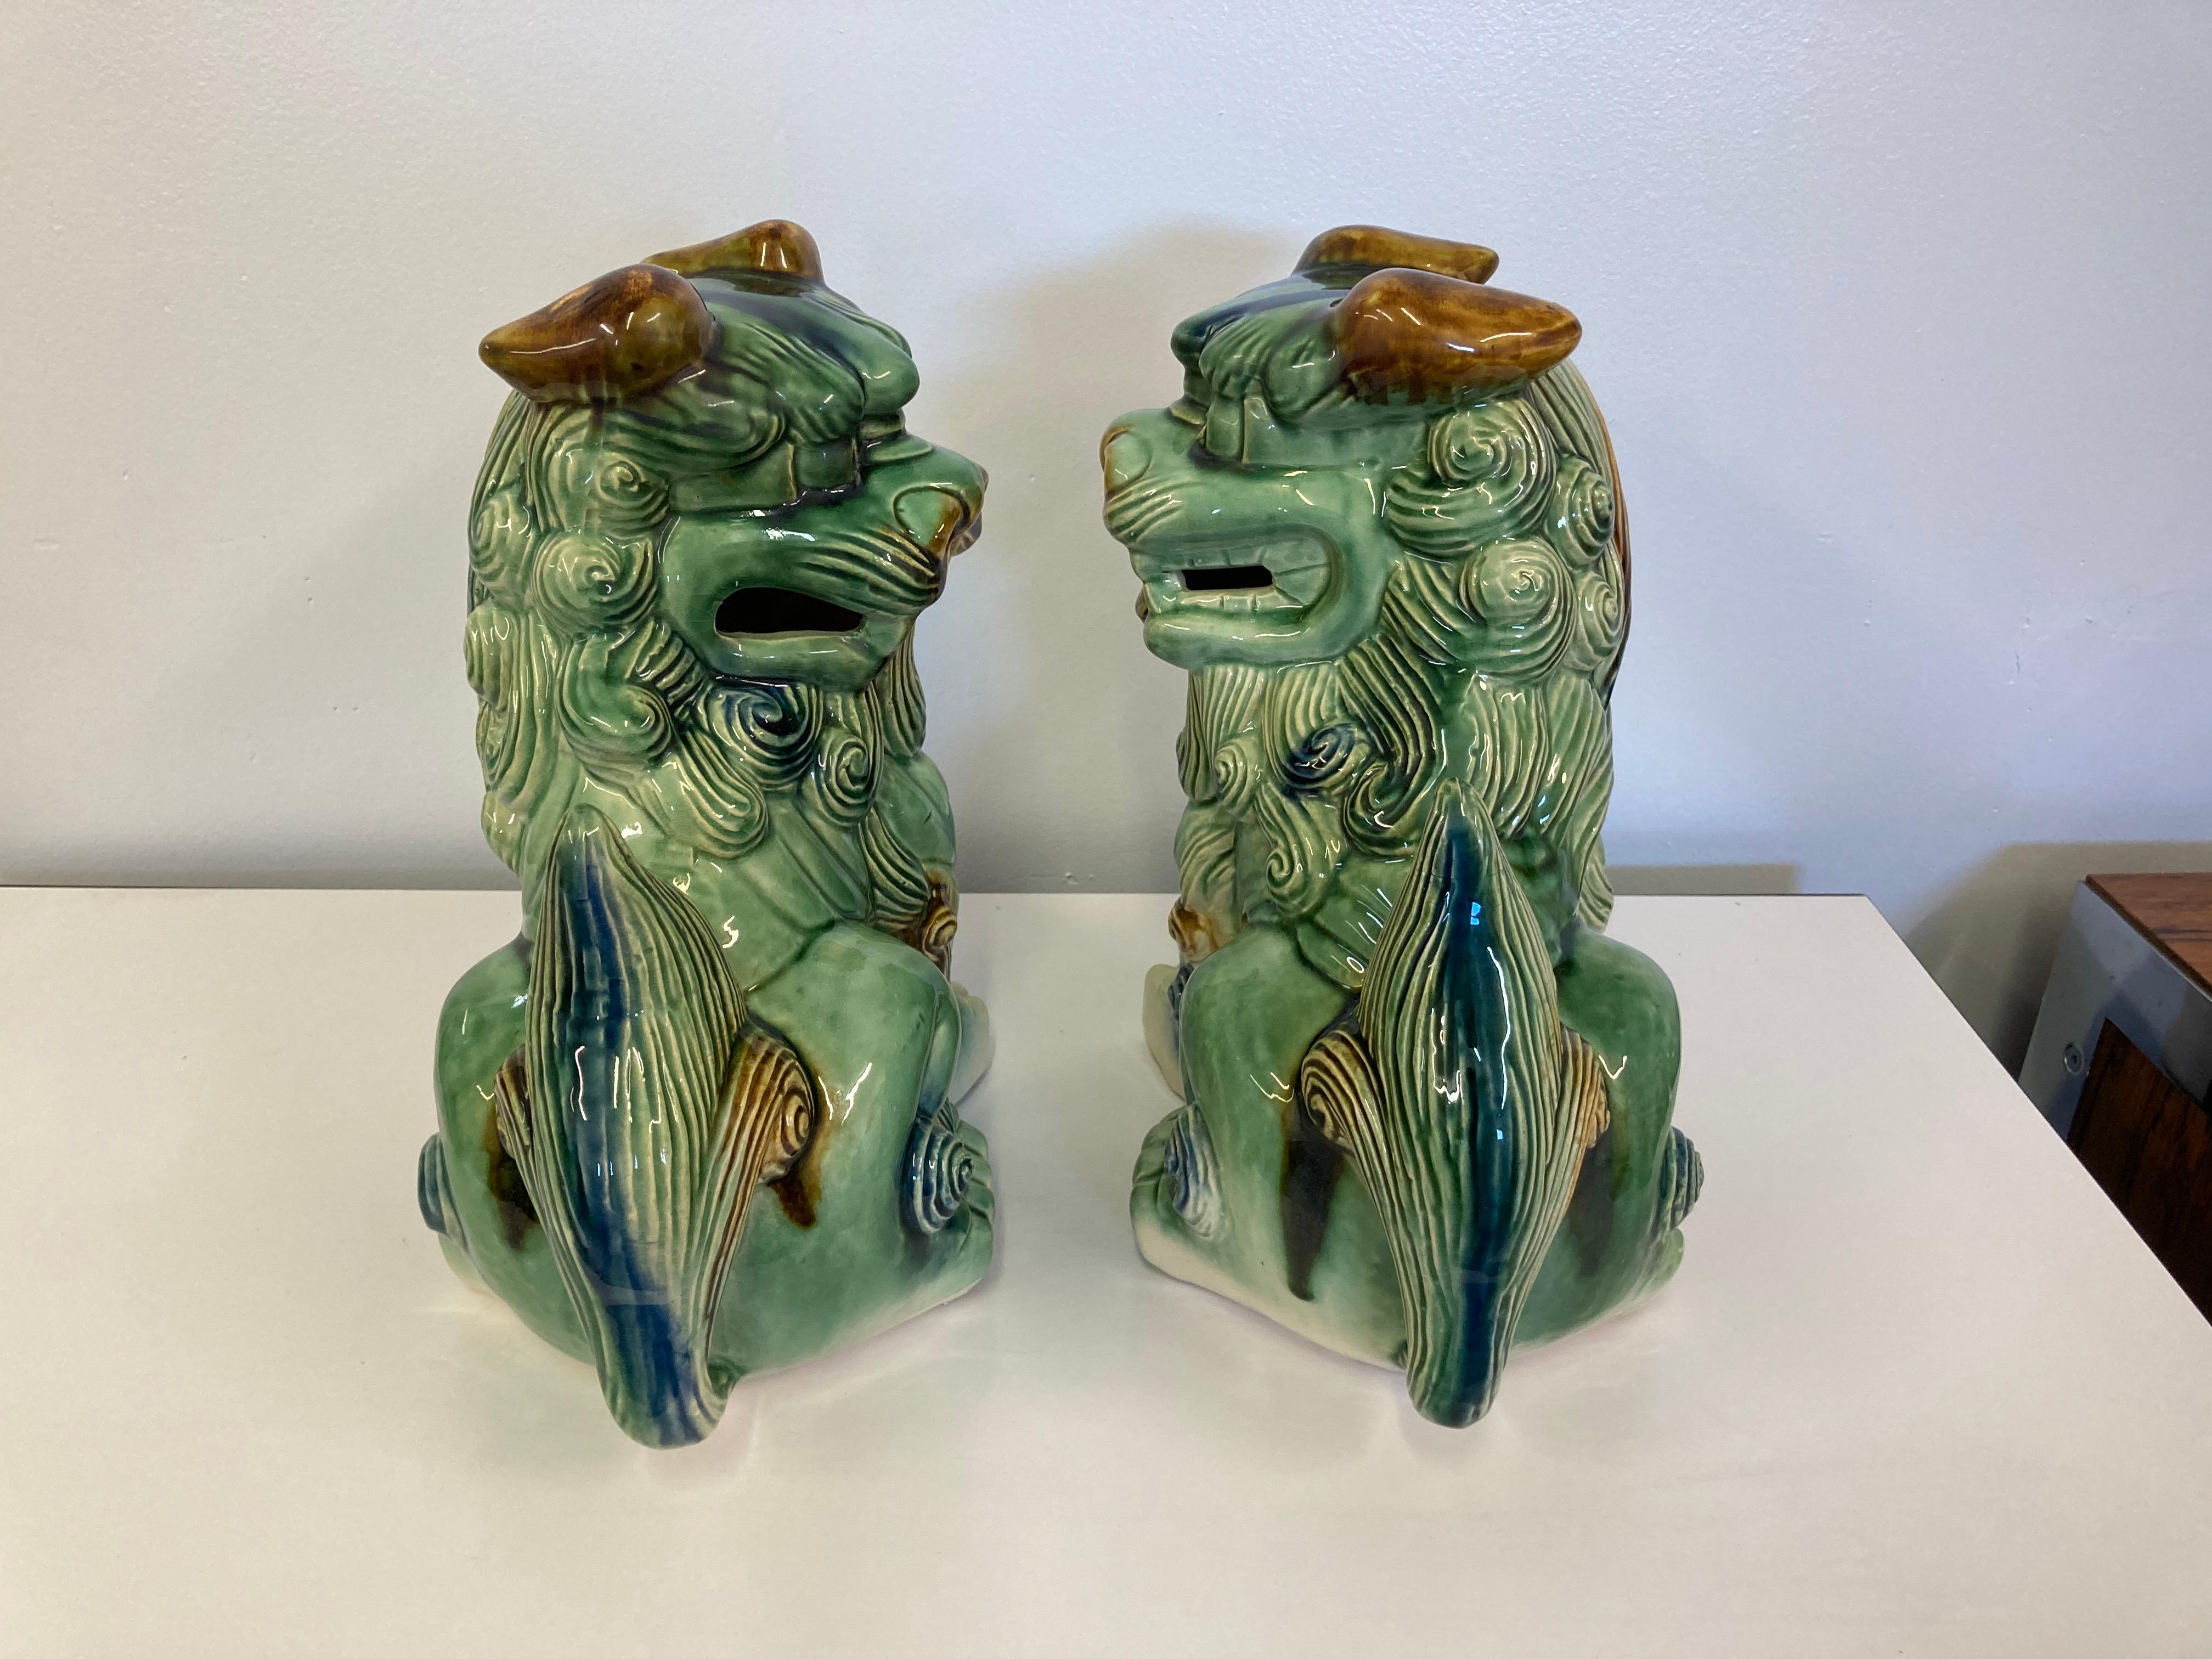 20th Century Pair of Vintage/Antique Chinese Porcelain Glazed Foo Dogs Temple Guardians